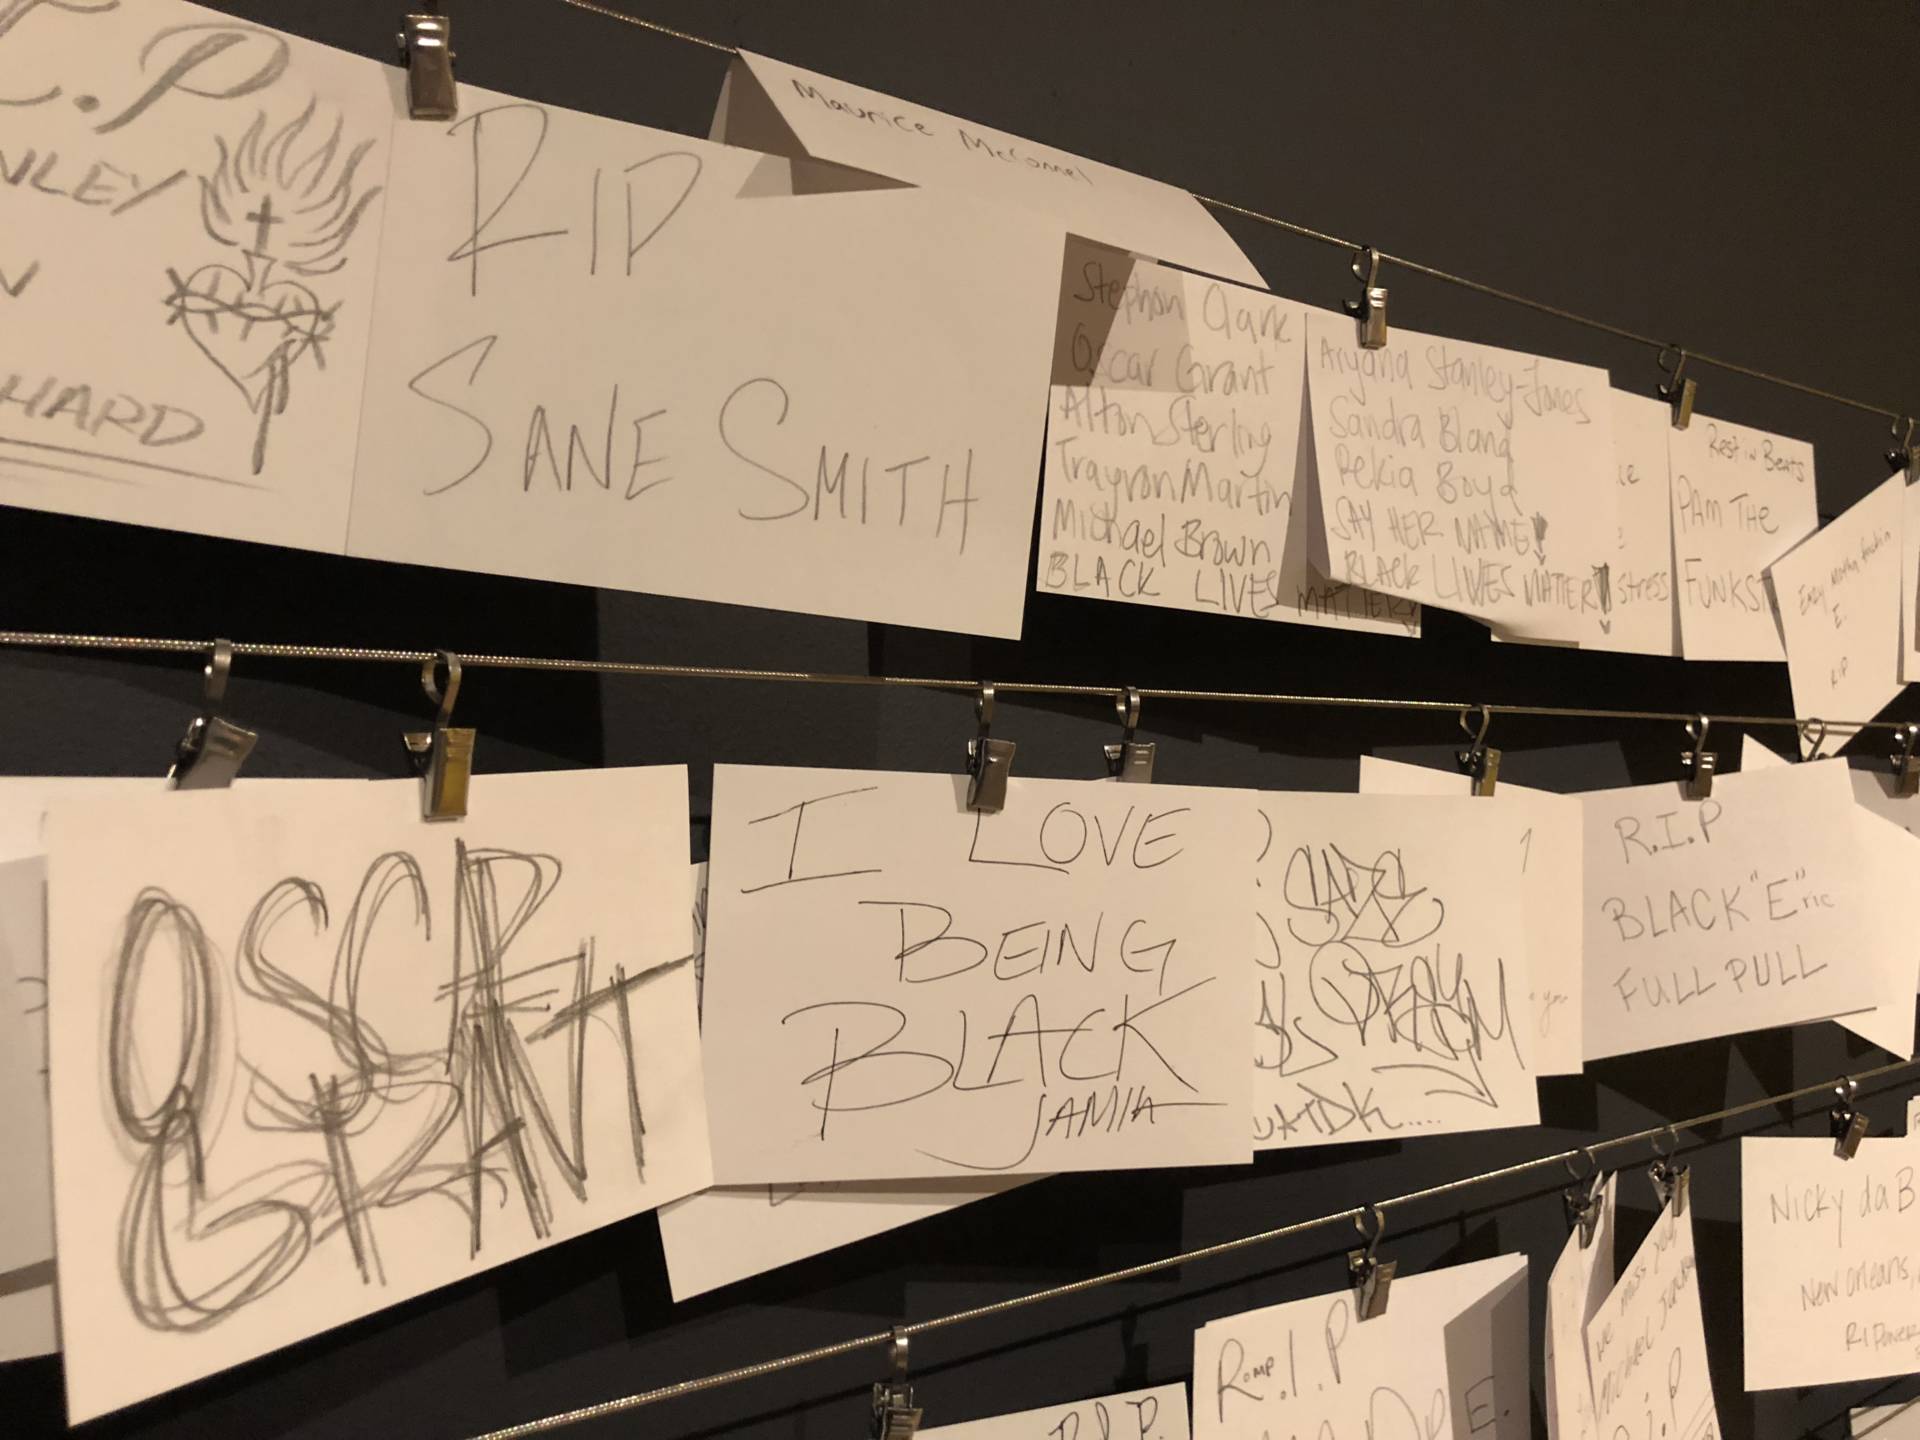 People can write their own memorials and hang them on the wall next to the street memorial.